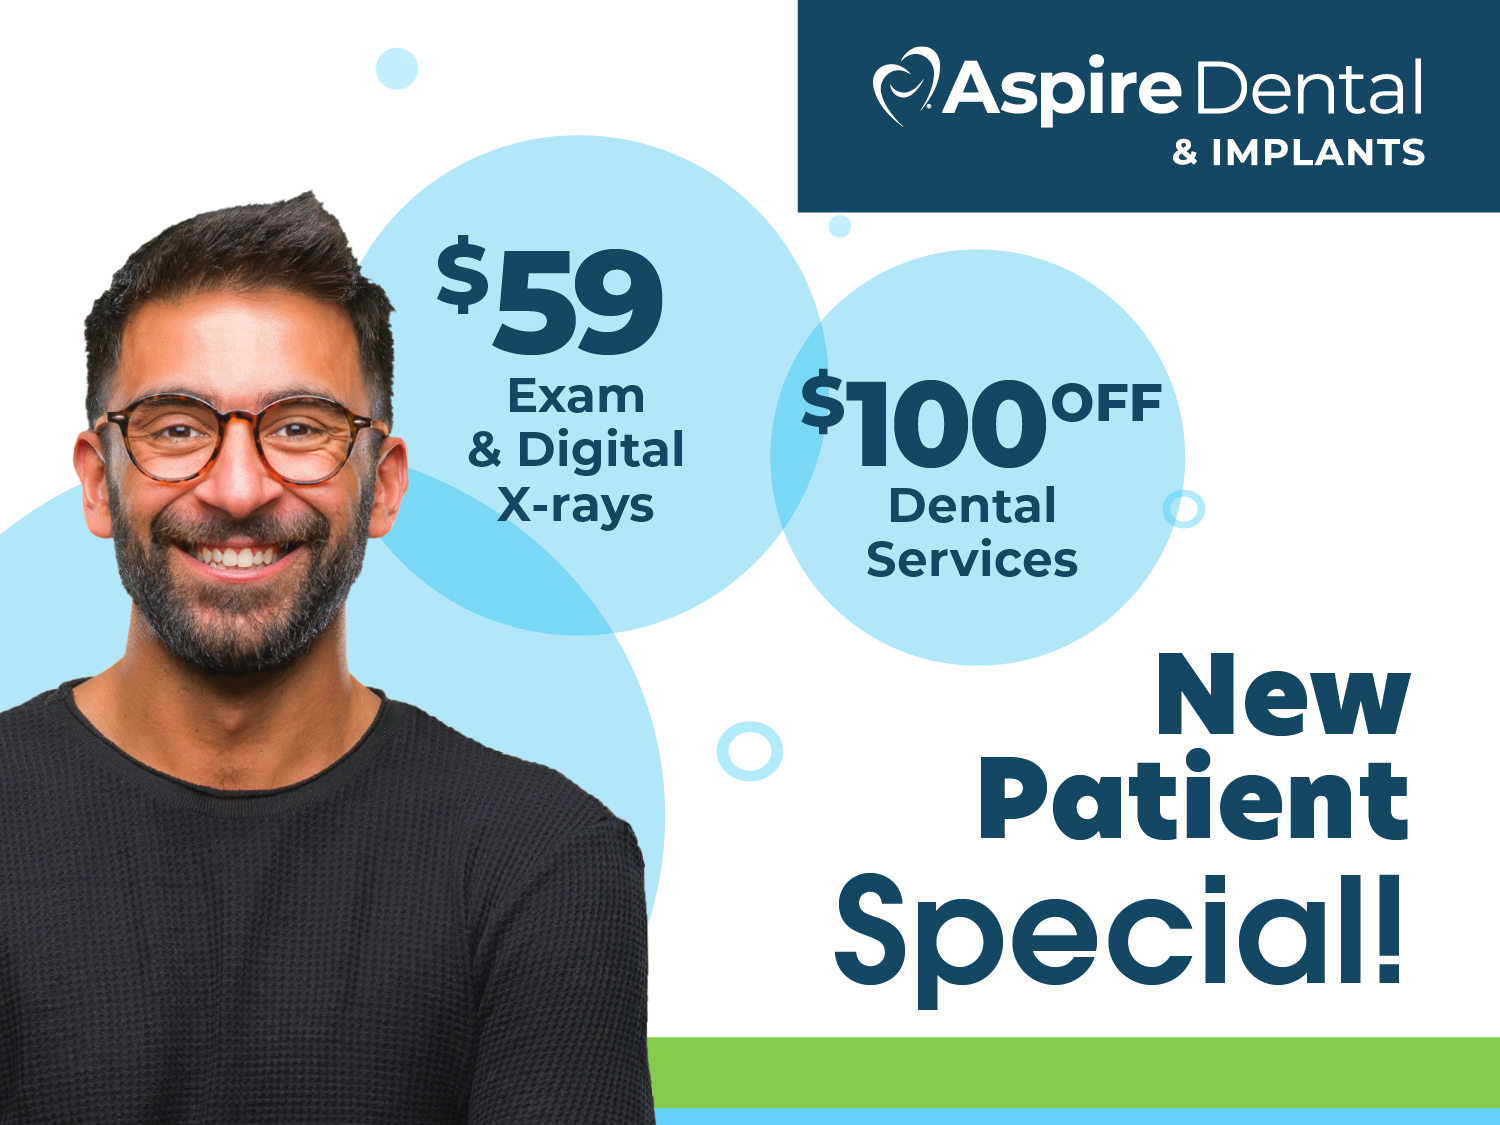 Looking for a new dentist in San Juan Capistrano? Visit Aspire Dental and ask us about our new patient offers!